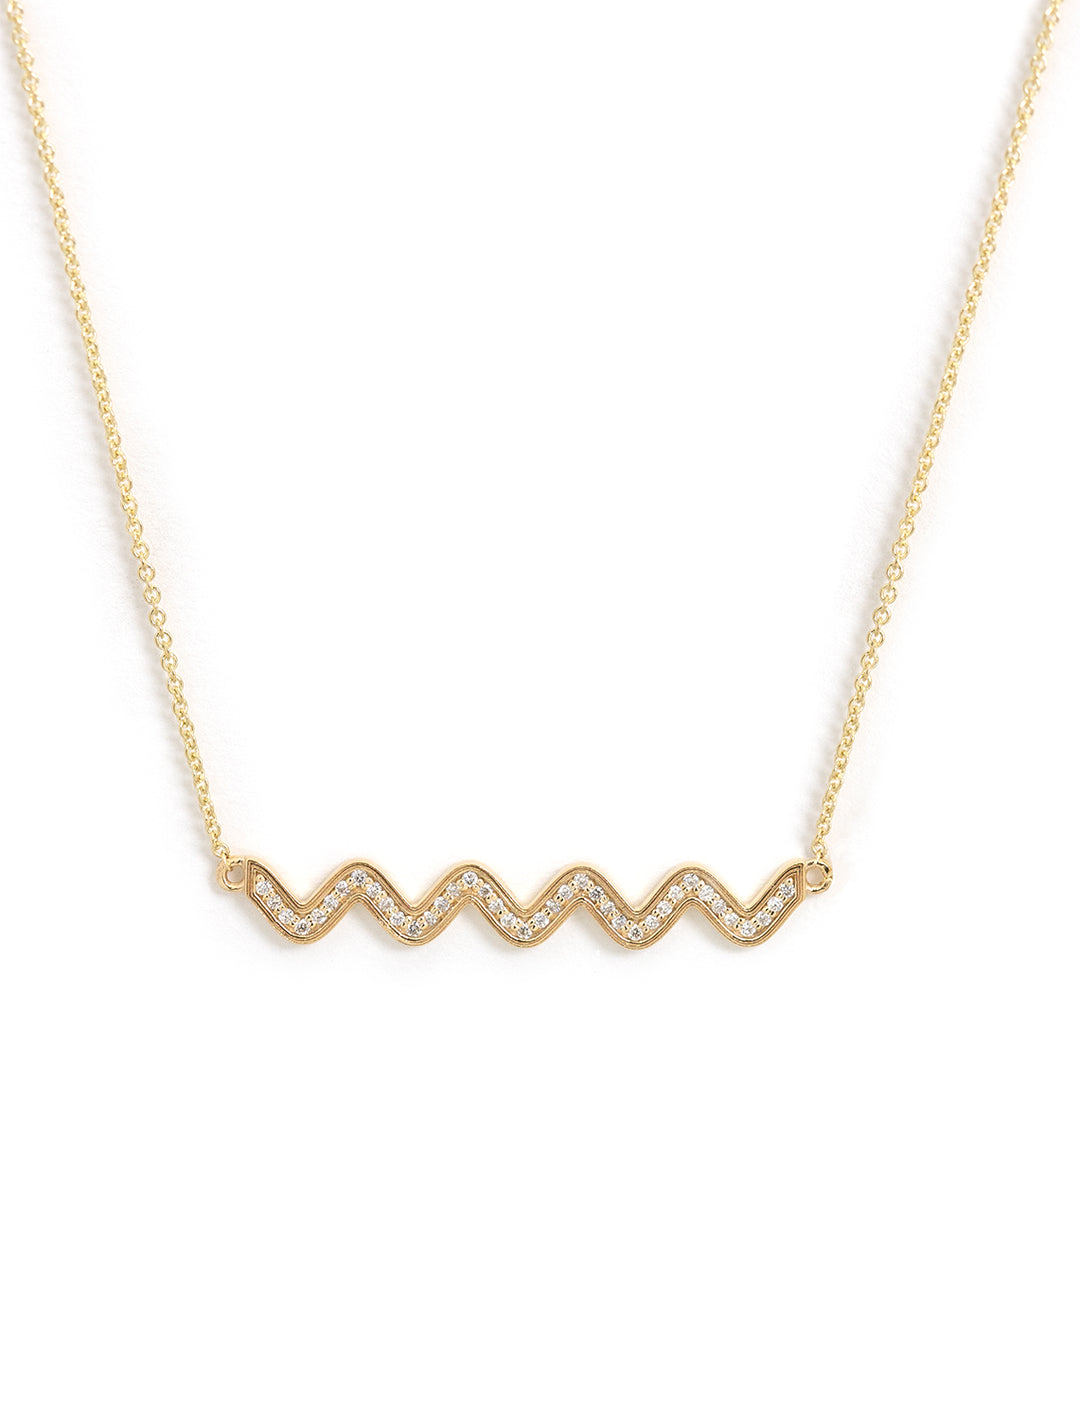 Front view of Sydney Evan's long wavy pave bar necklace.